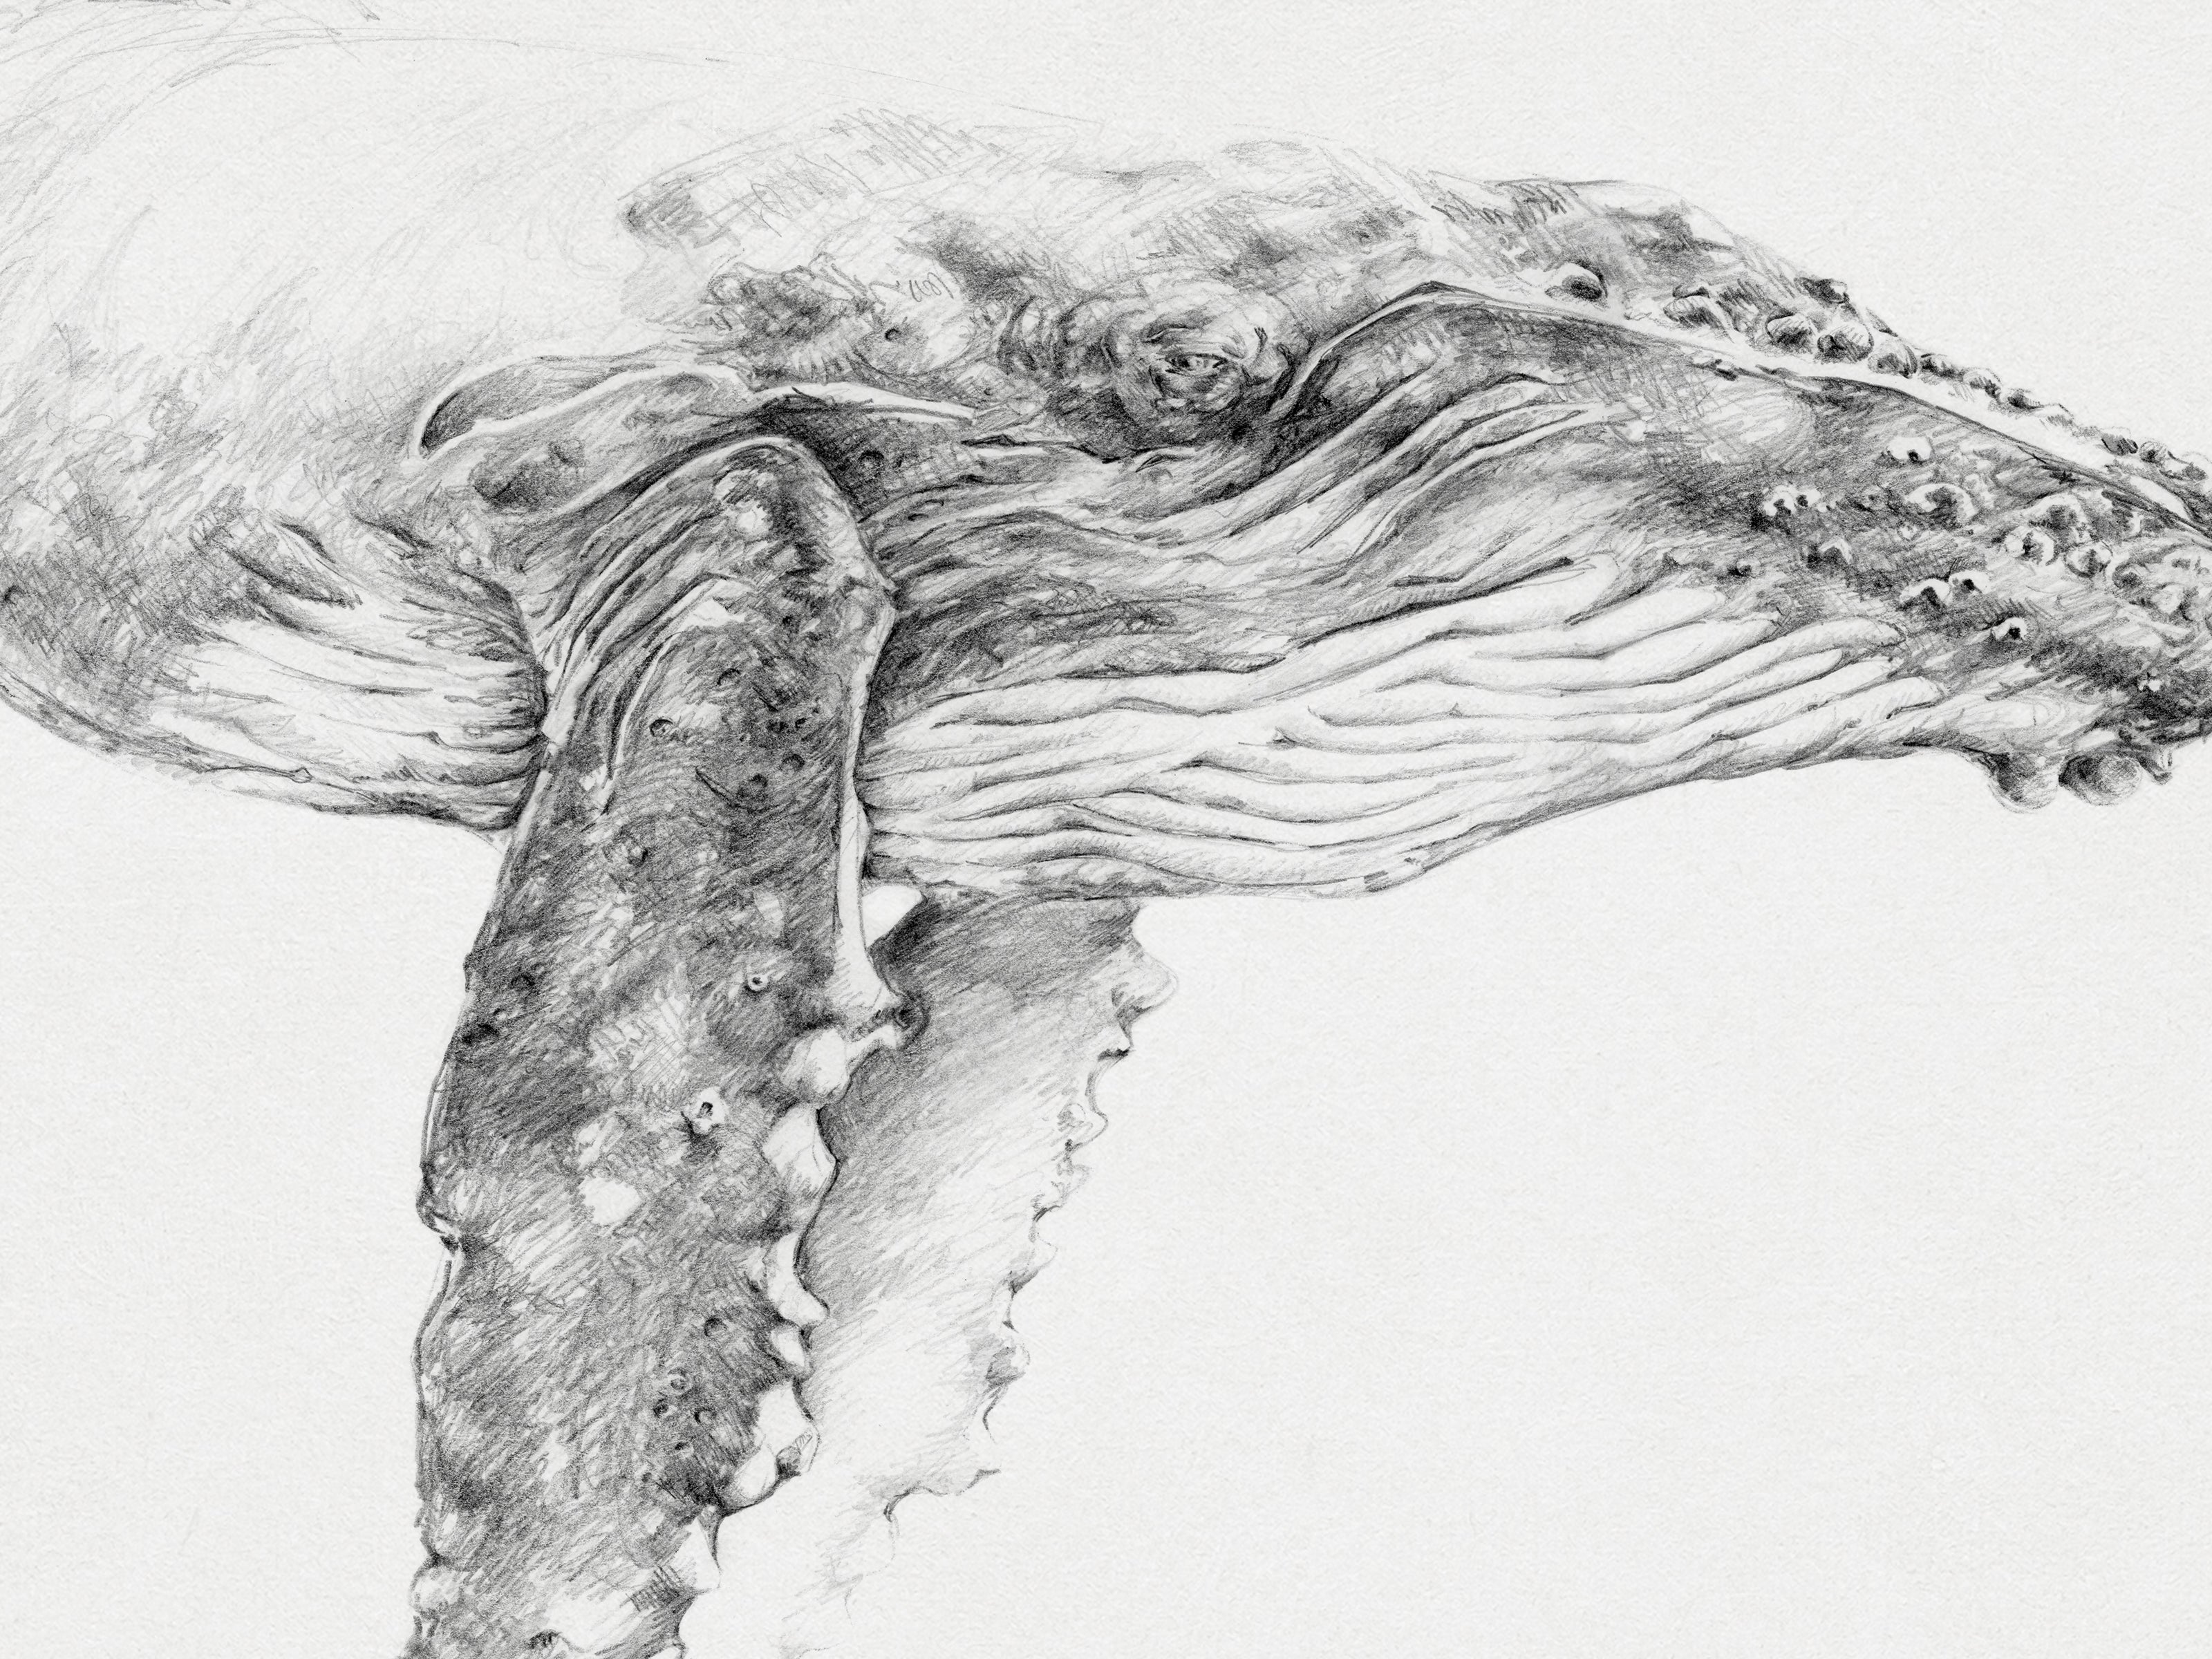 graphite drawing of humpback whale by nature artist antonia reyes montealegre